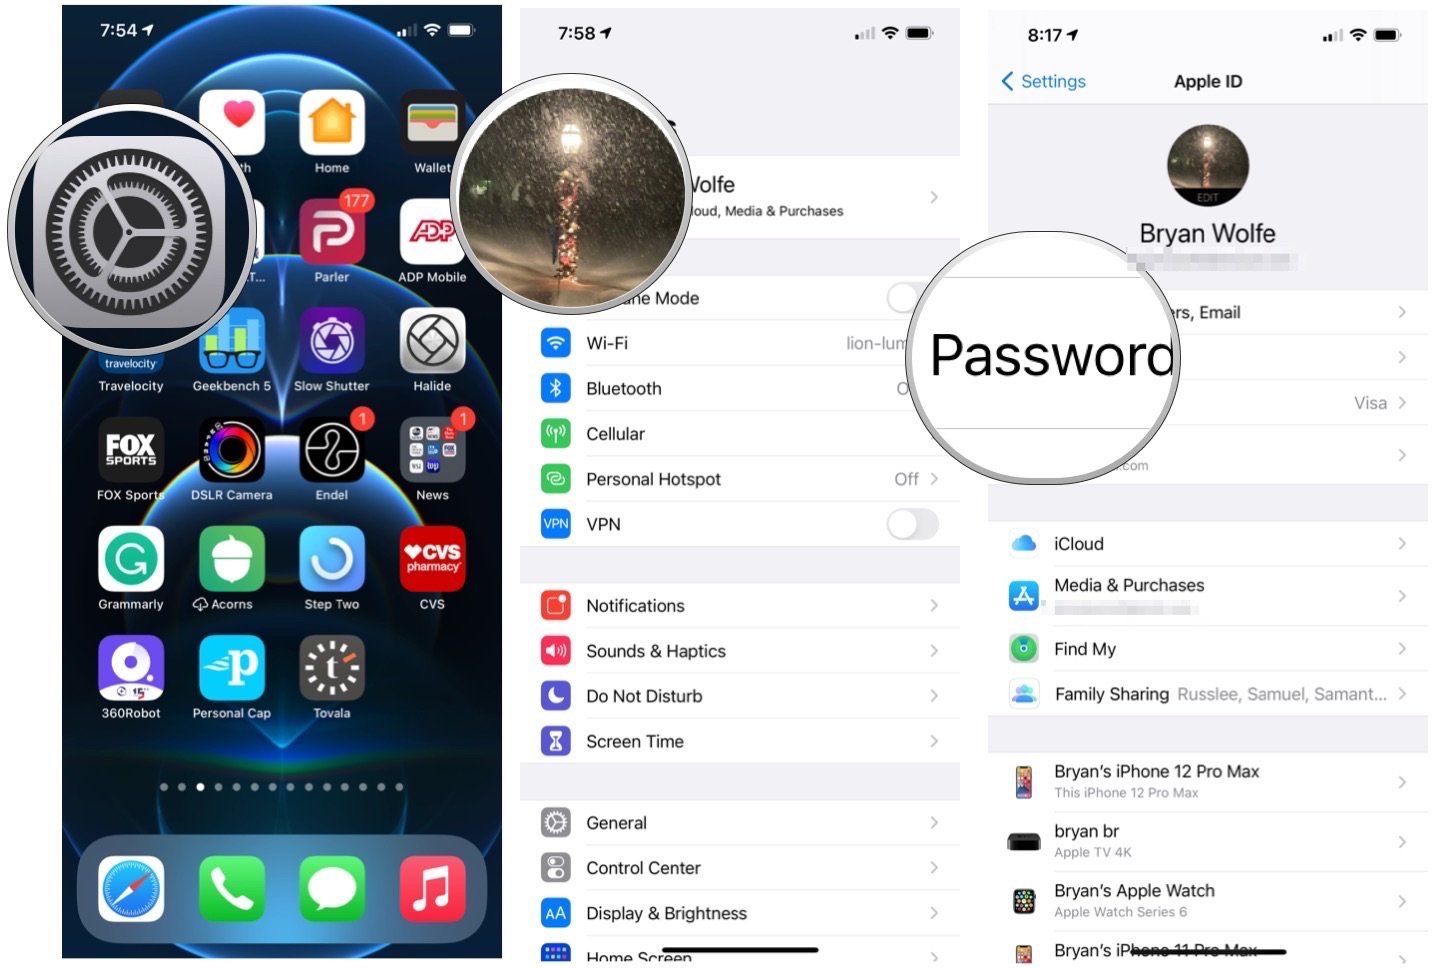 To view your password and security information on iPhone and iPad, launch the Settings app, then tap your Apple ID banner, choose Password.